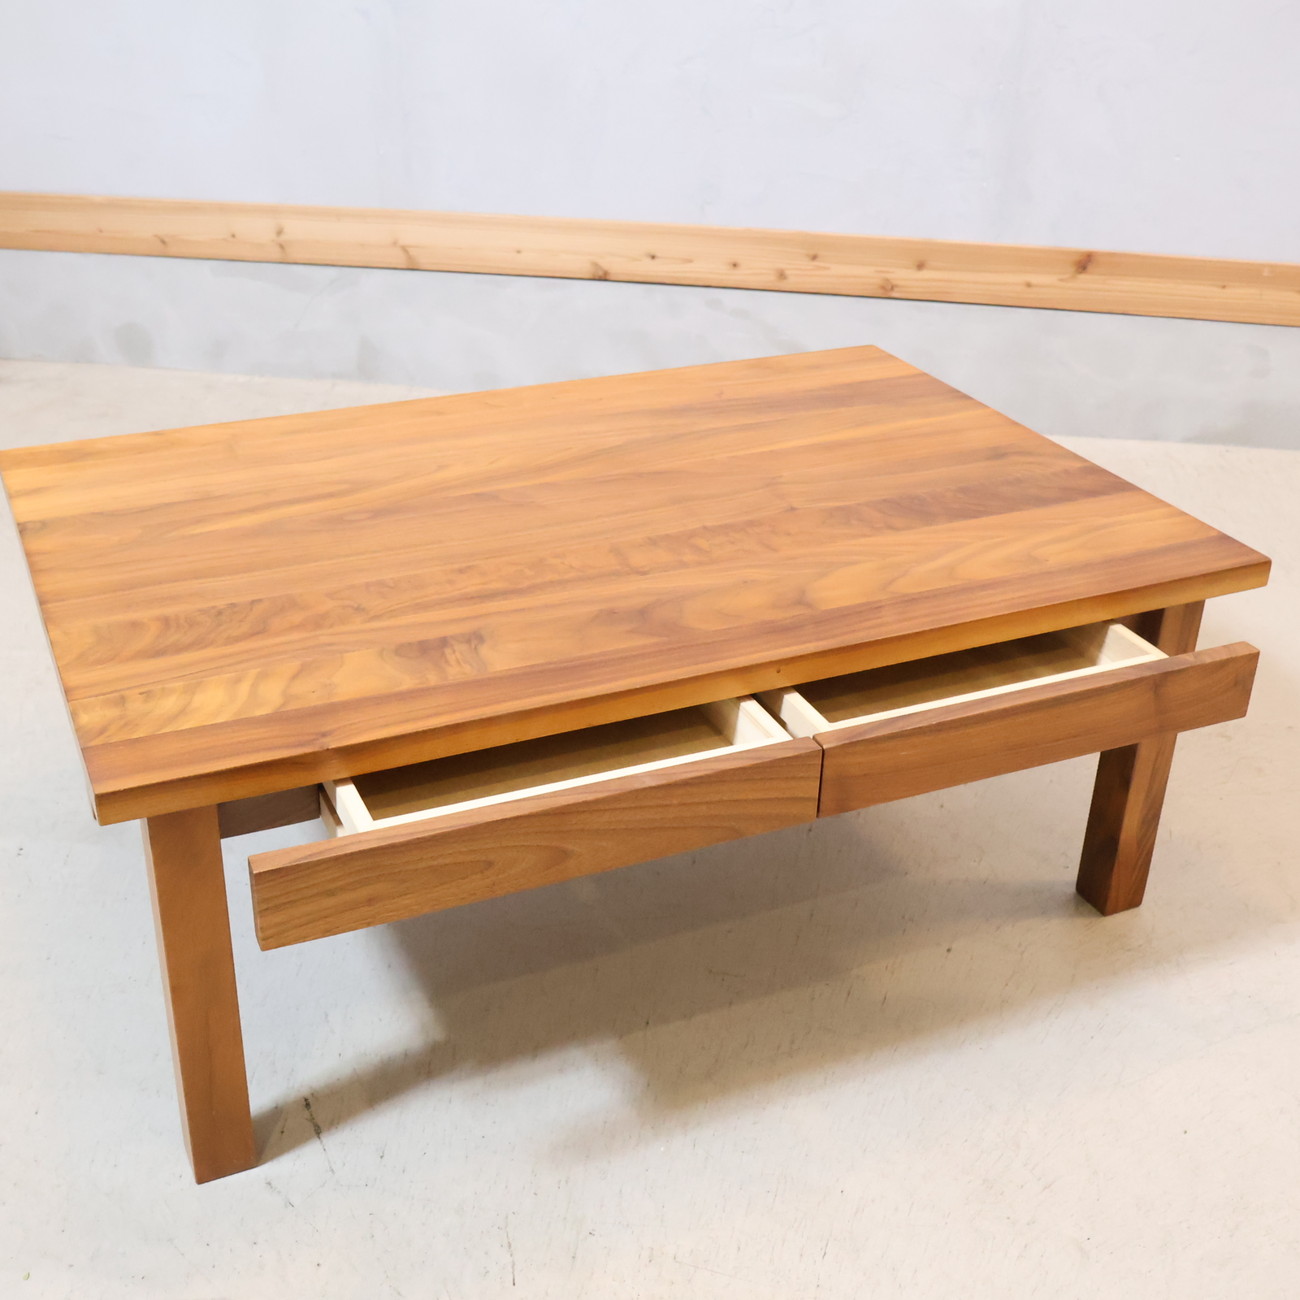  Muji Ryohin MUJI walnut natural wood low table drawer attaching living table Northern Europe style simple modern casual Cafe manner ED210